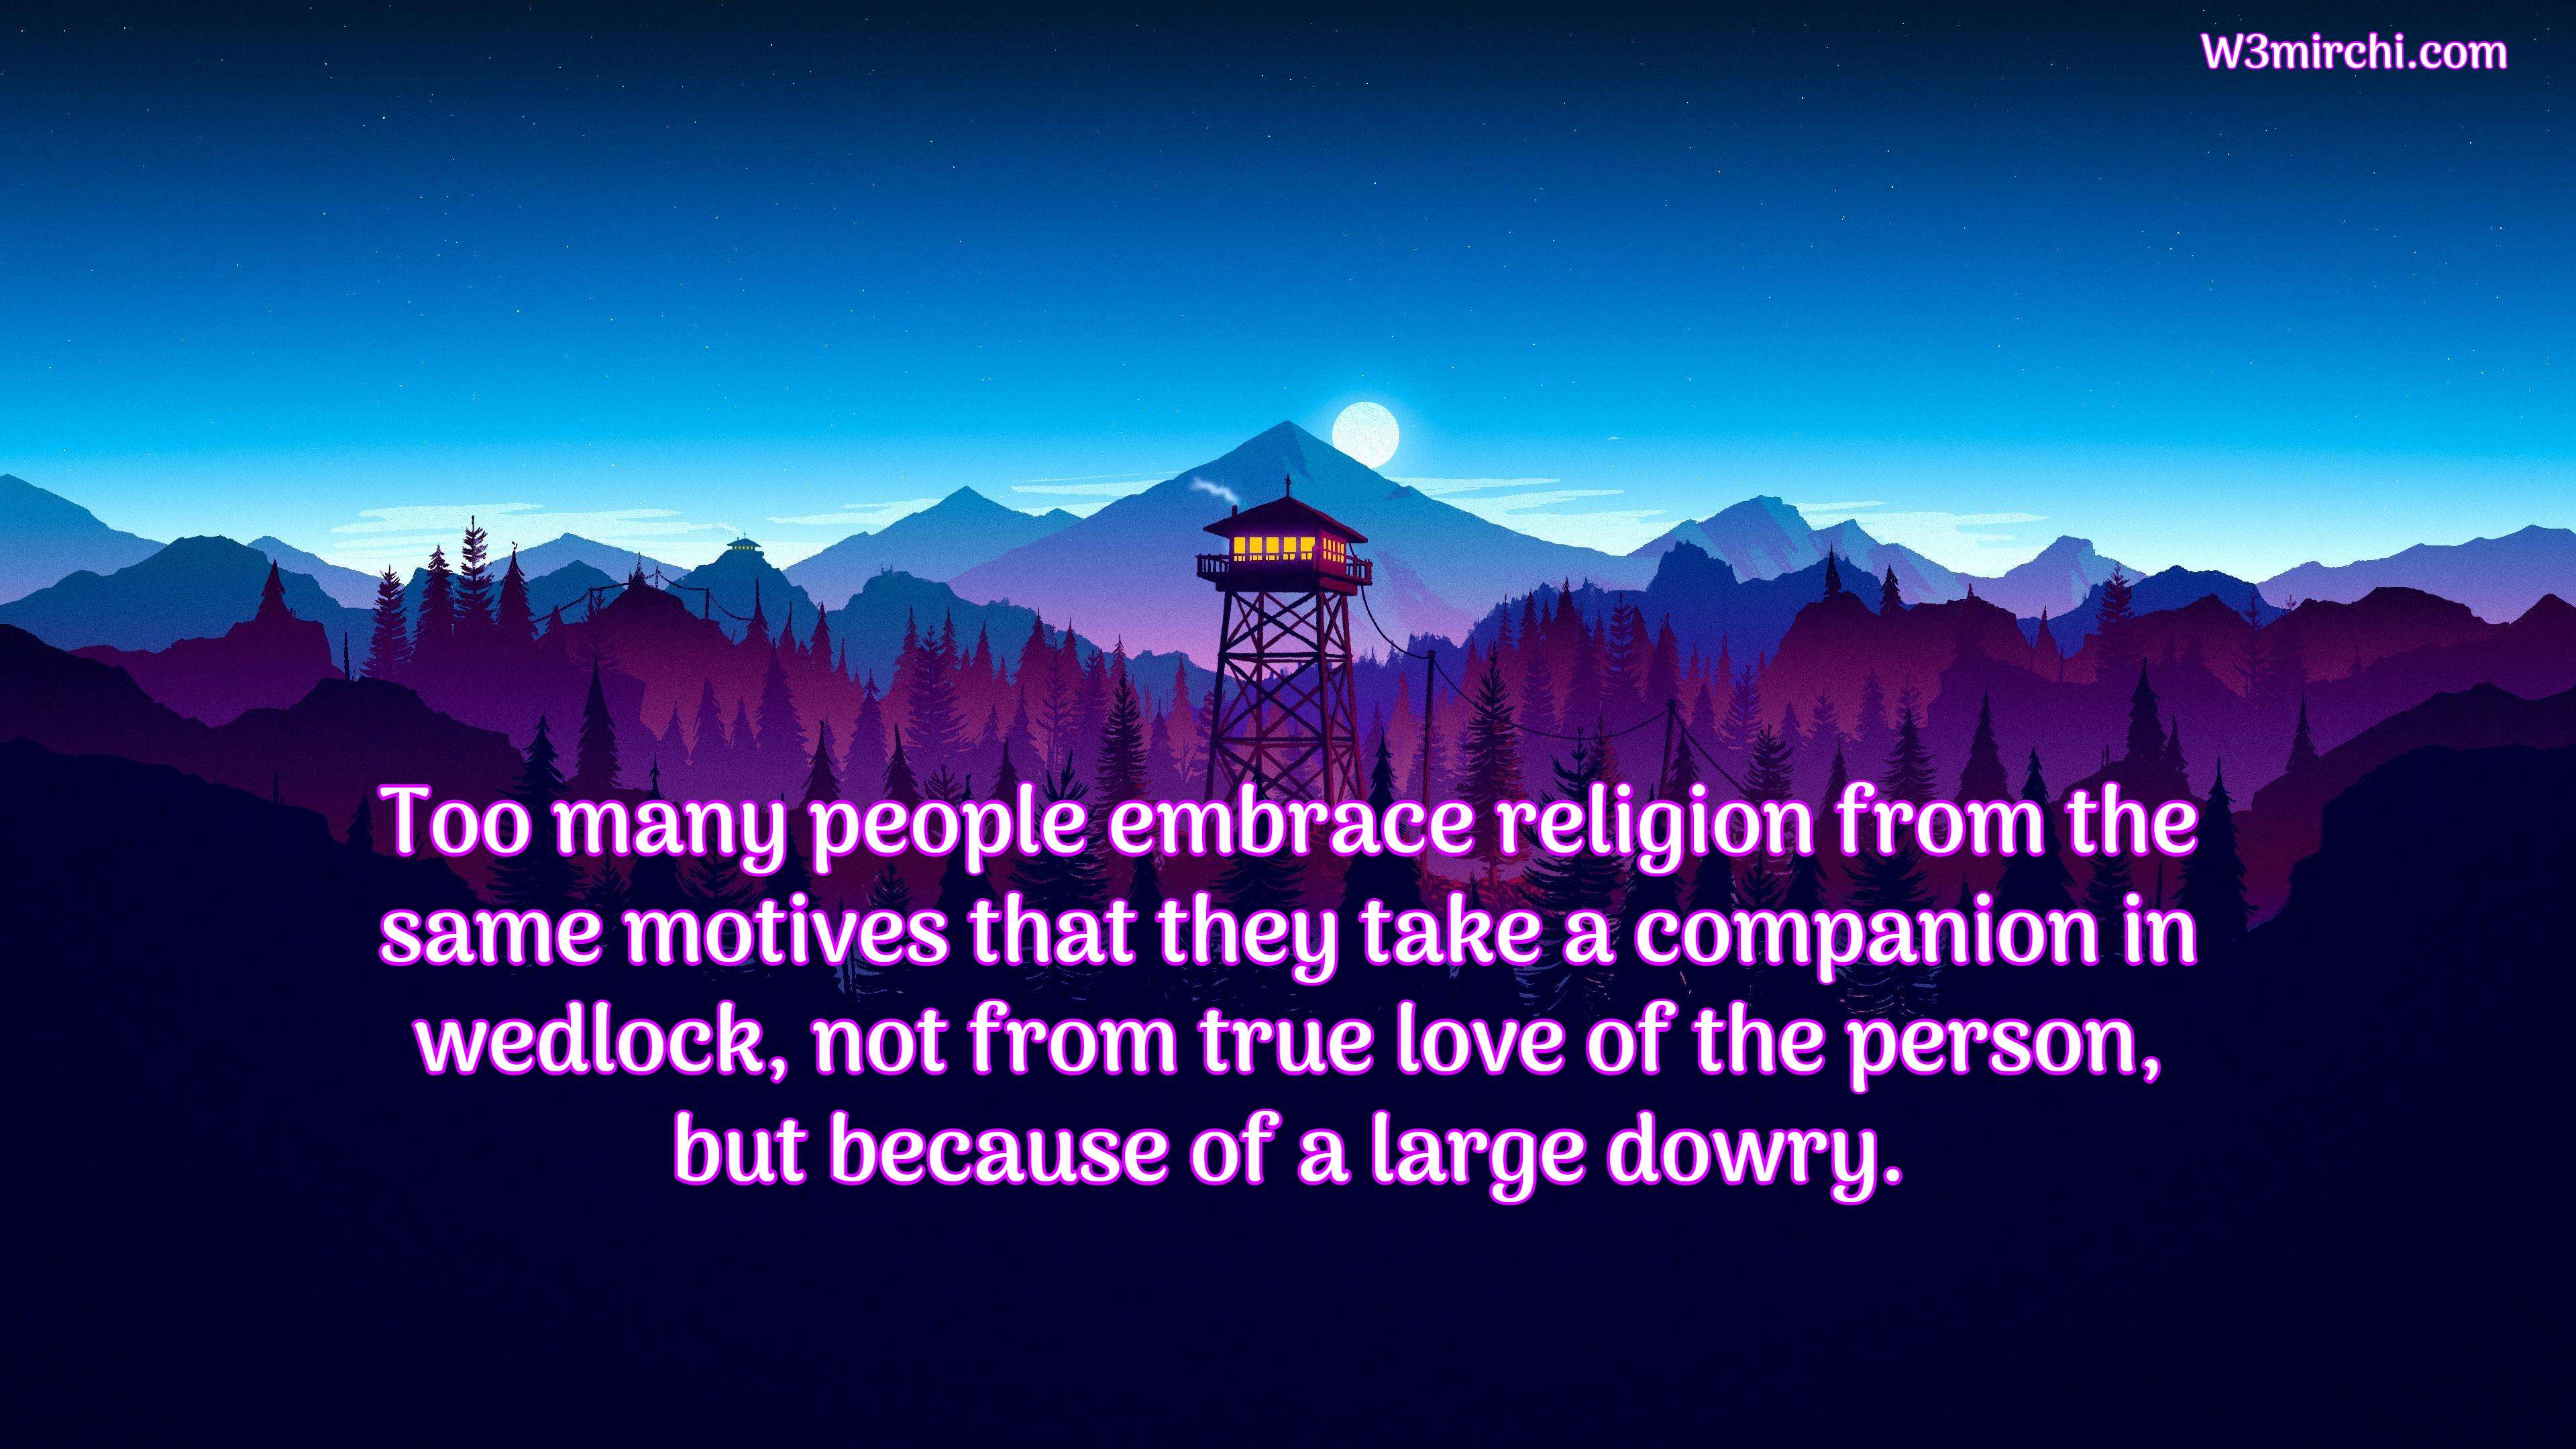 Too many people embrace religion from